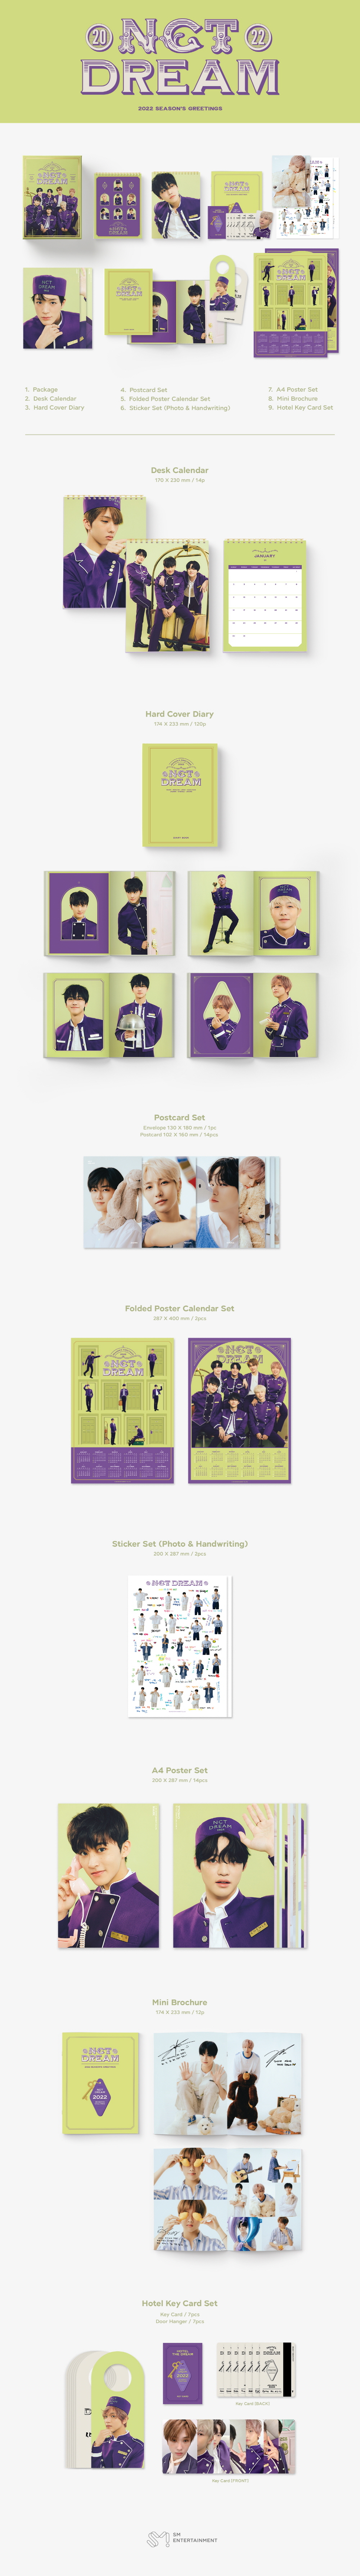 [NCT DREAM] 2022 SEASON'S GREETINGS (Special Benefit) nct dream nctdream greetings seasons 2022 2022sg benefit nctdream2022 nctdreamsg